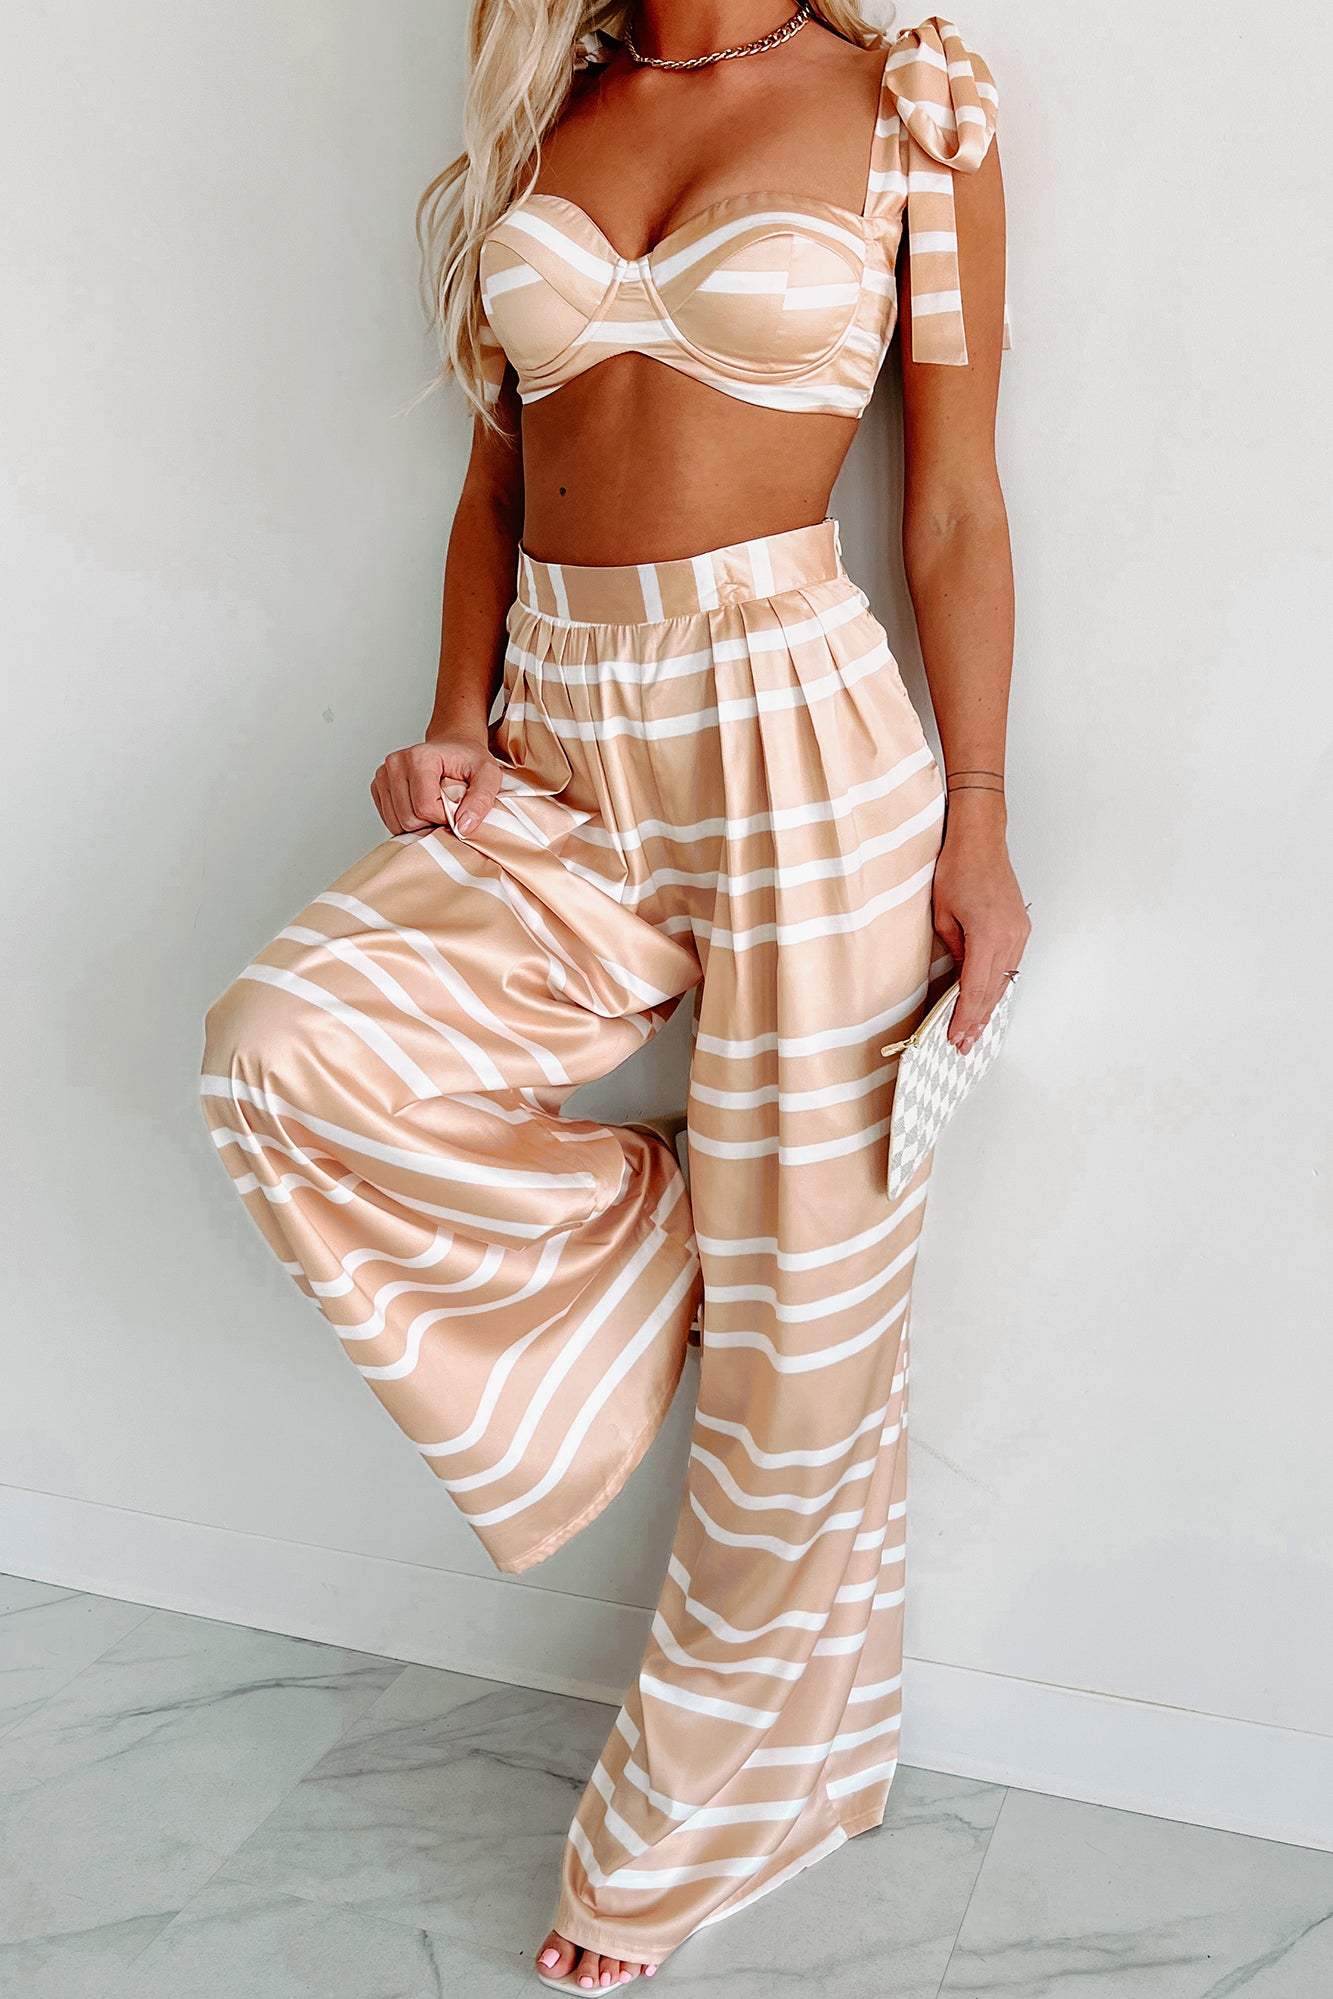 18 Loose Crop Top Outfits To Repeat - Styleoholic